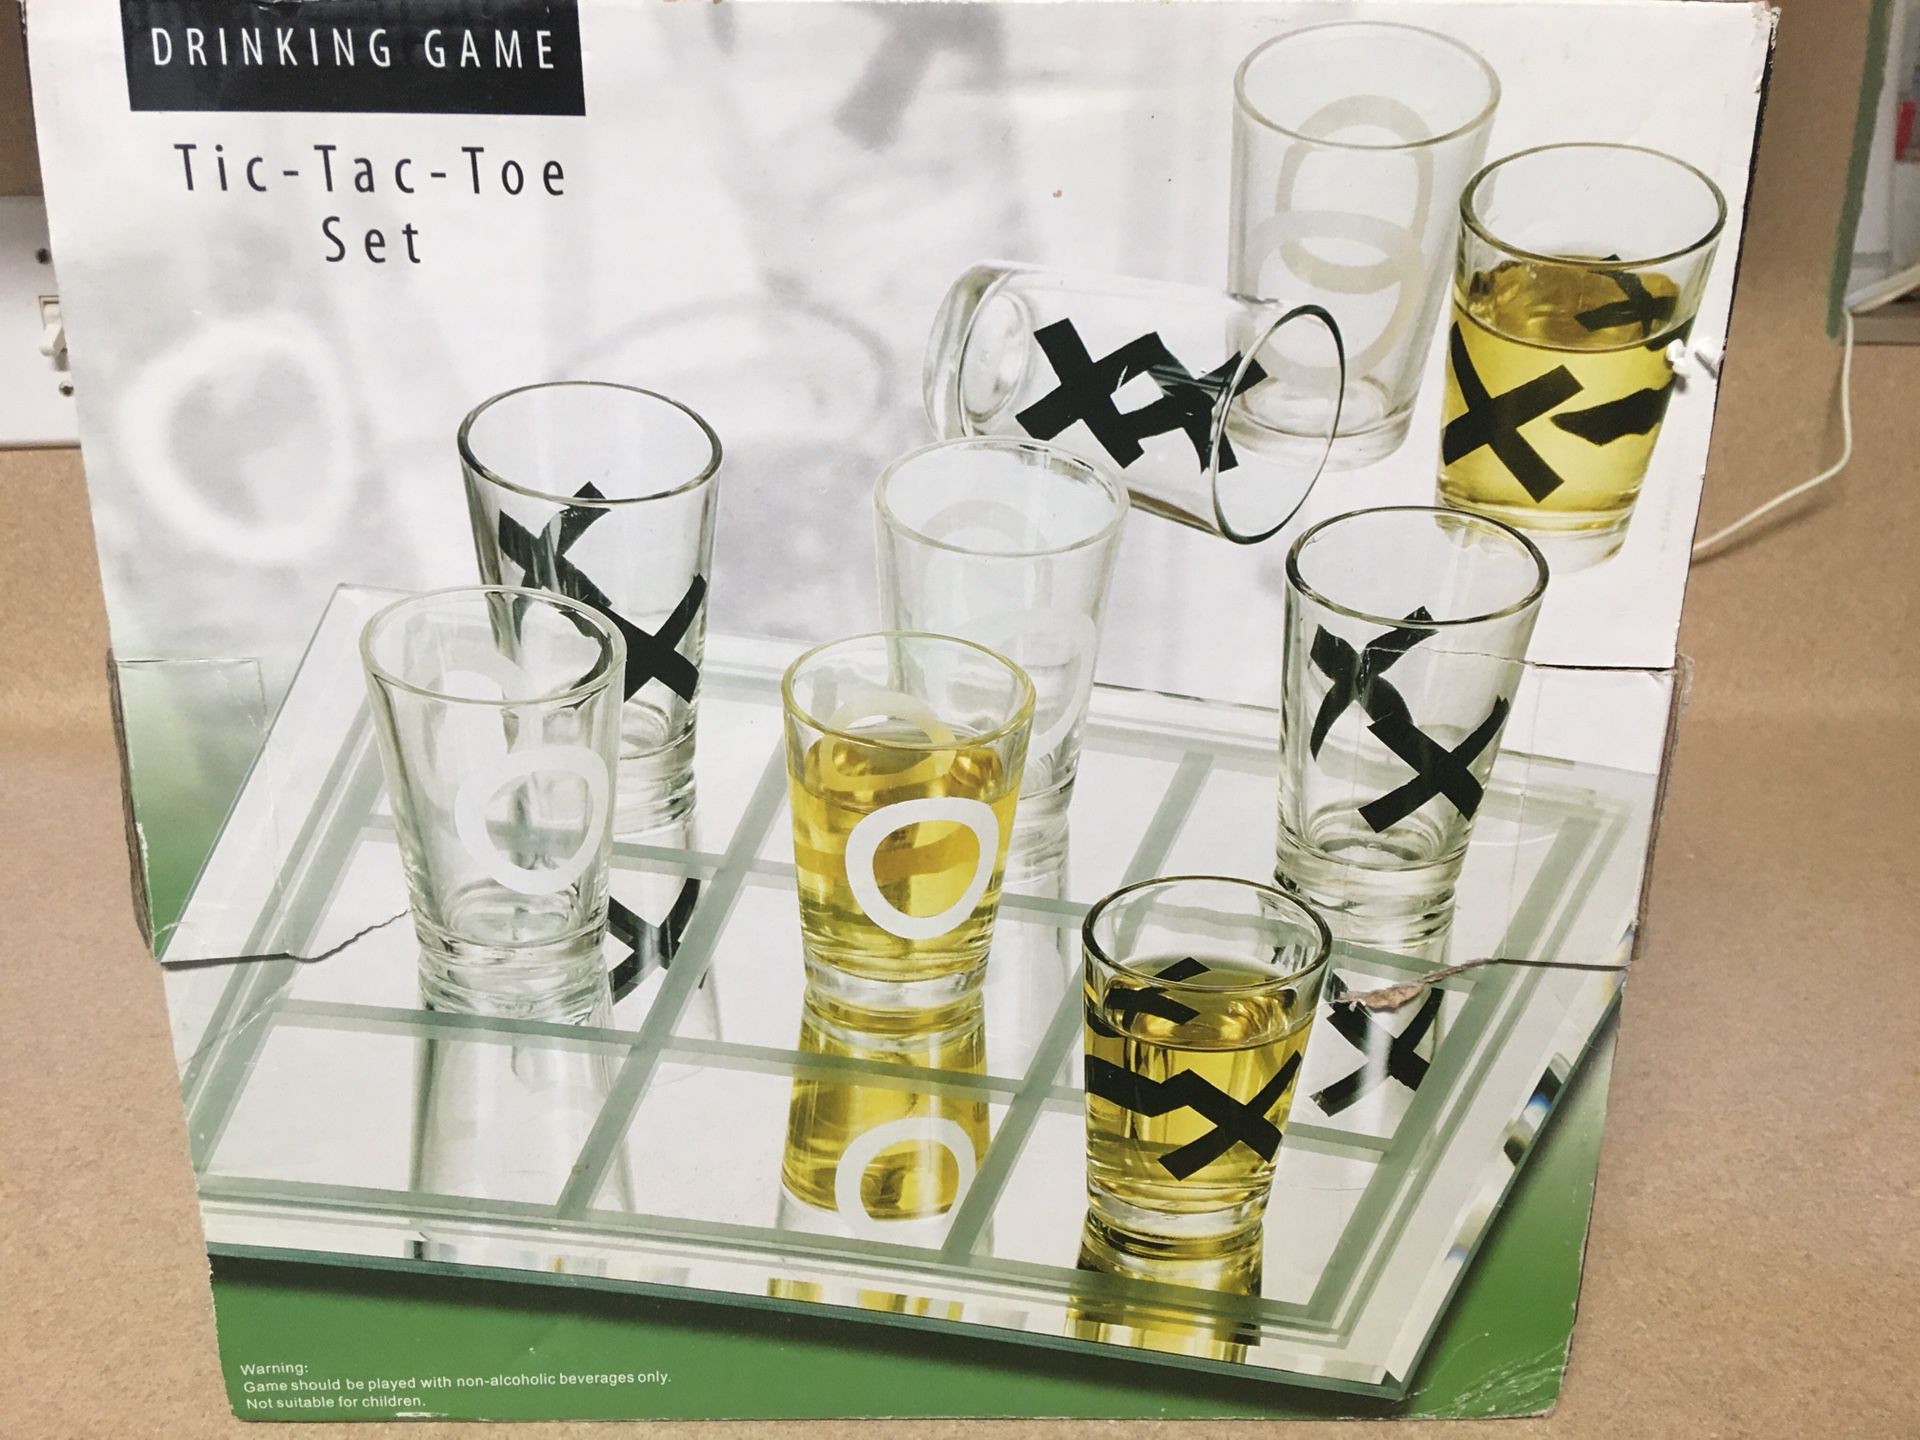 New Tic-Tac-Toe Drink Game